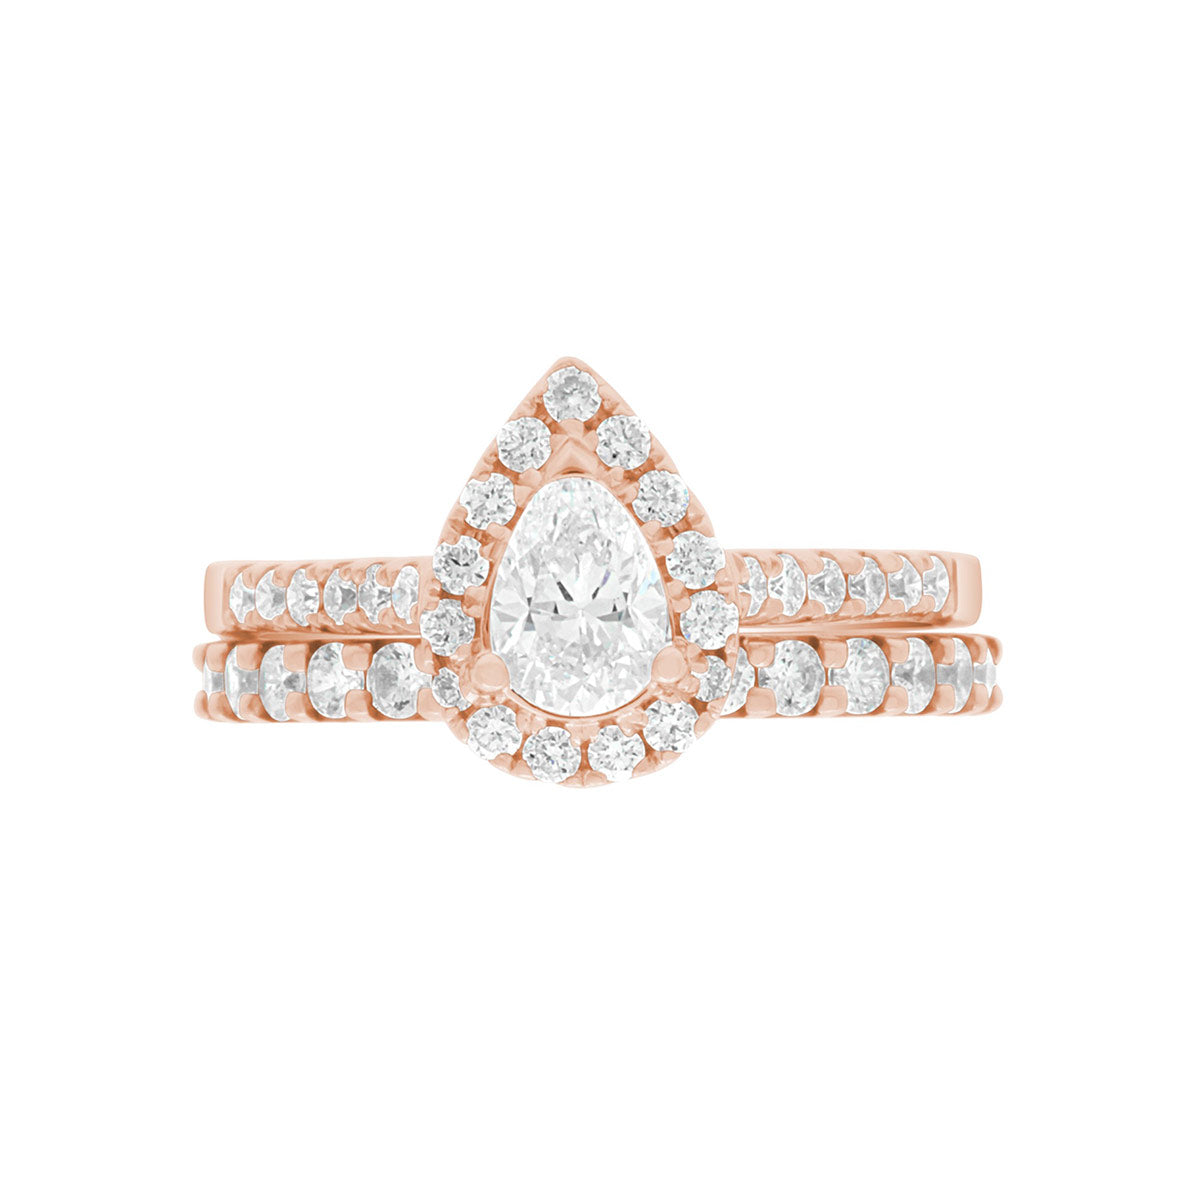 Pear Cut Halo Ring in rose gold, laying flat with a matching rose gold diamond set wedding band,on A WHITE SURFACE WITH A WHITE BACKGROUND